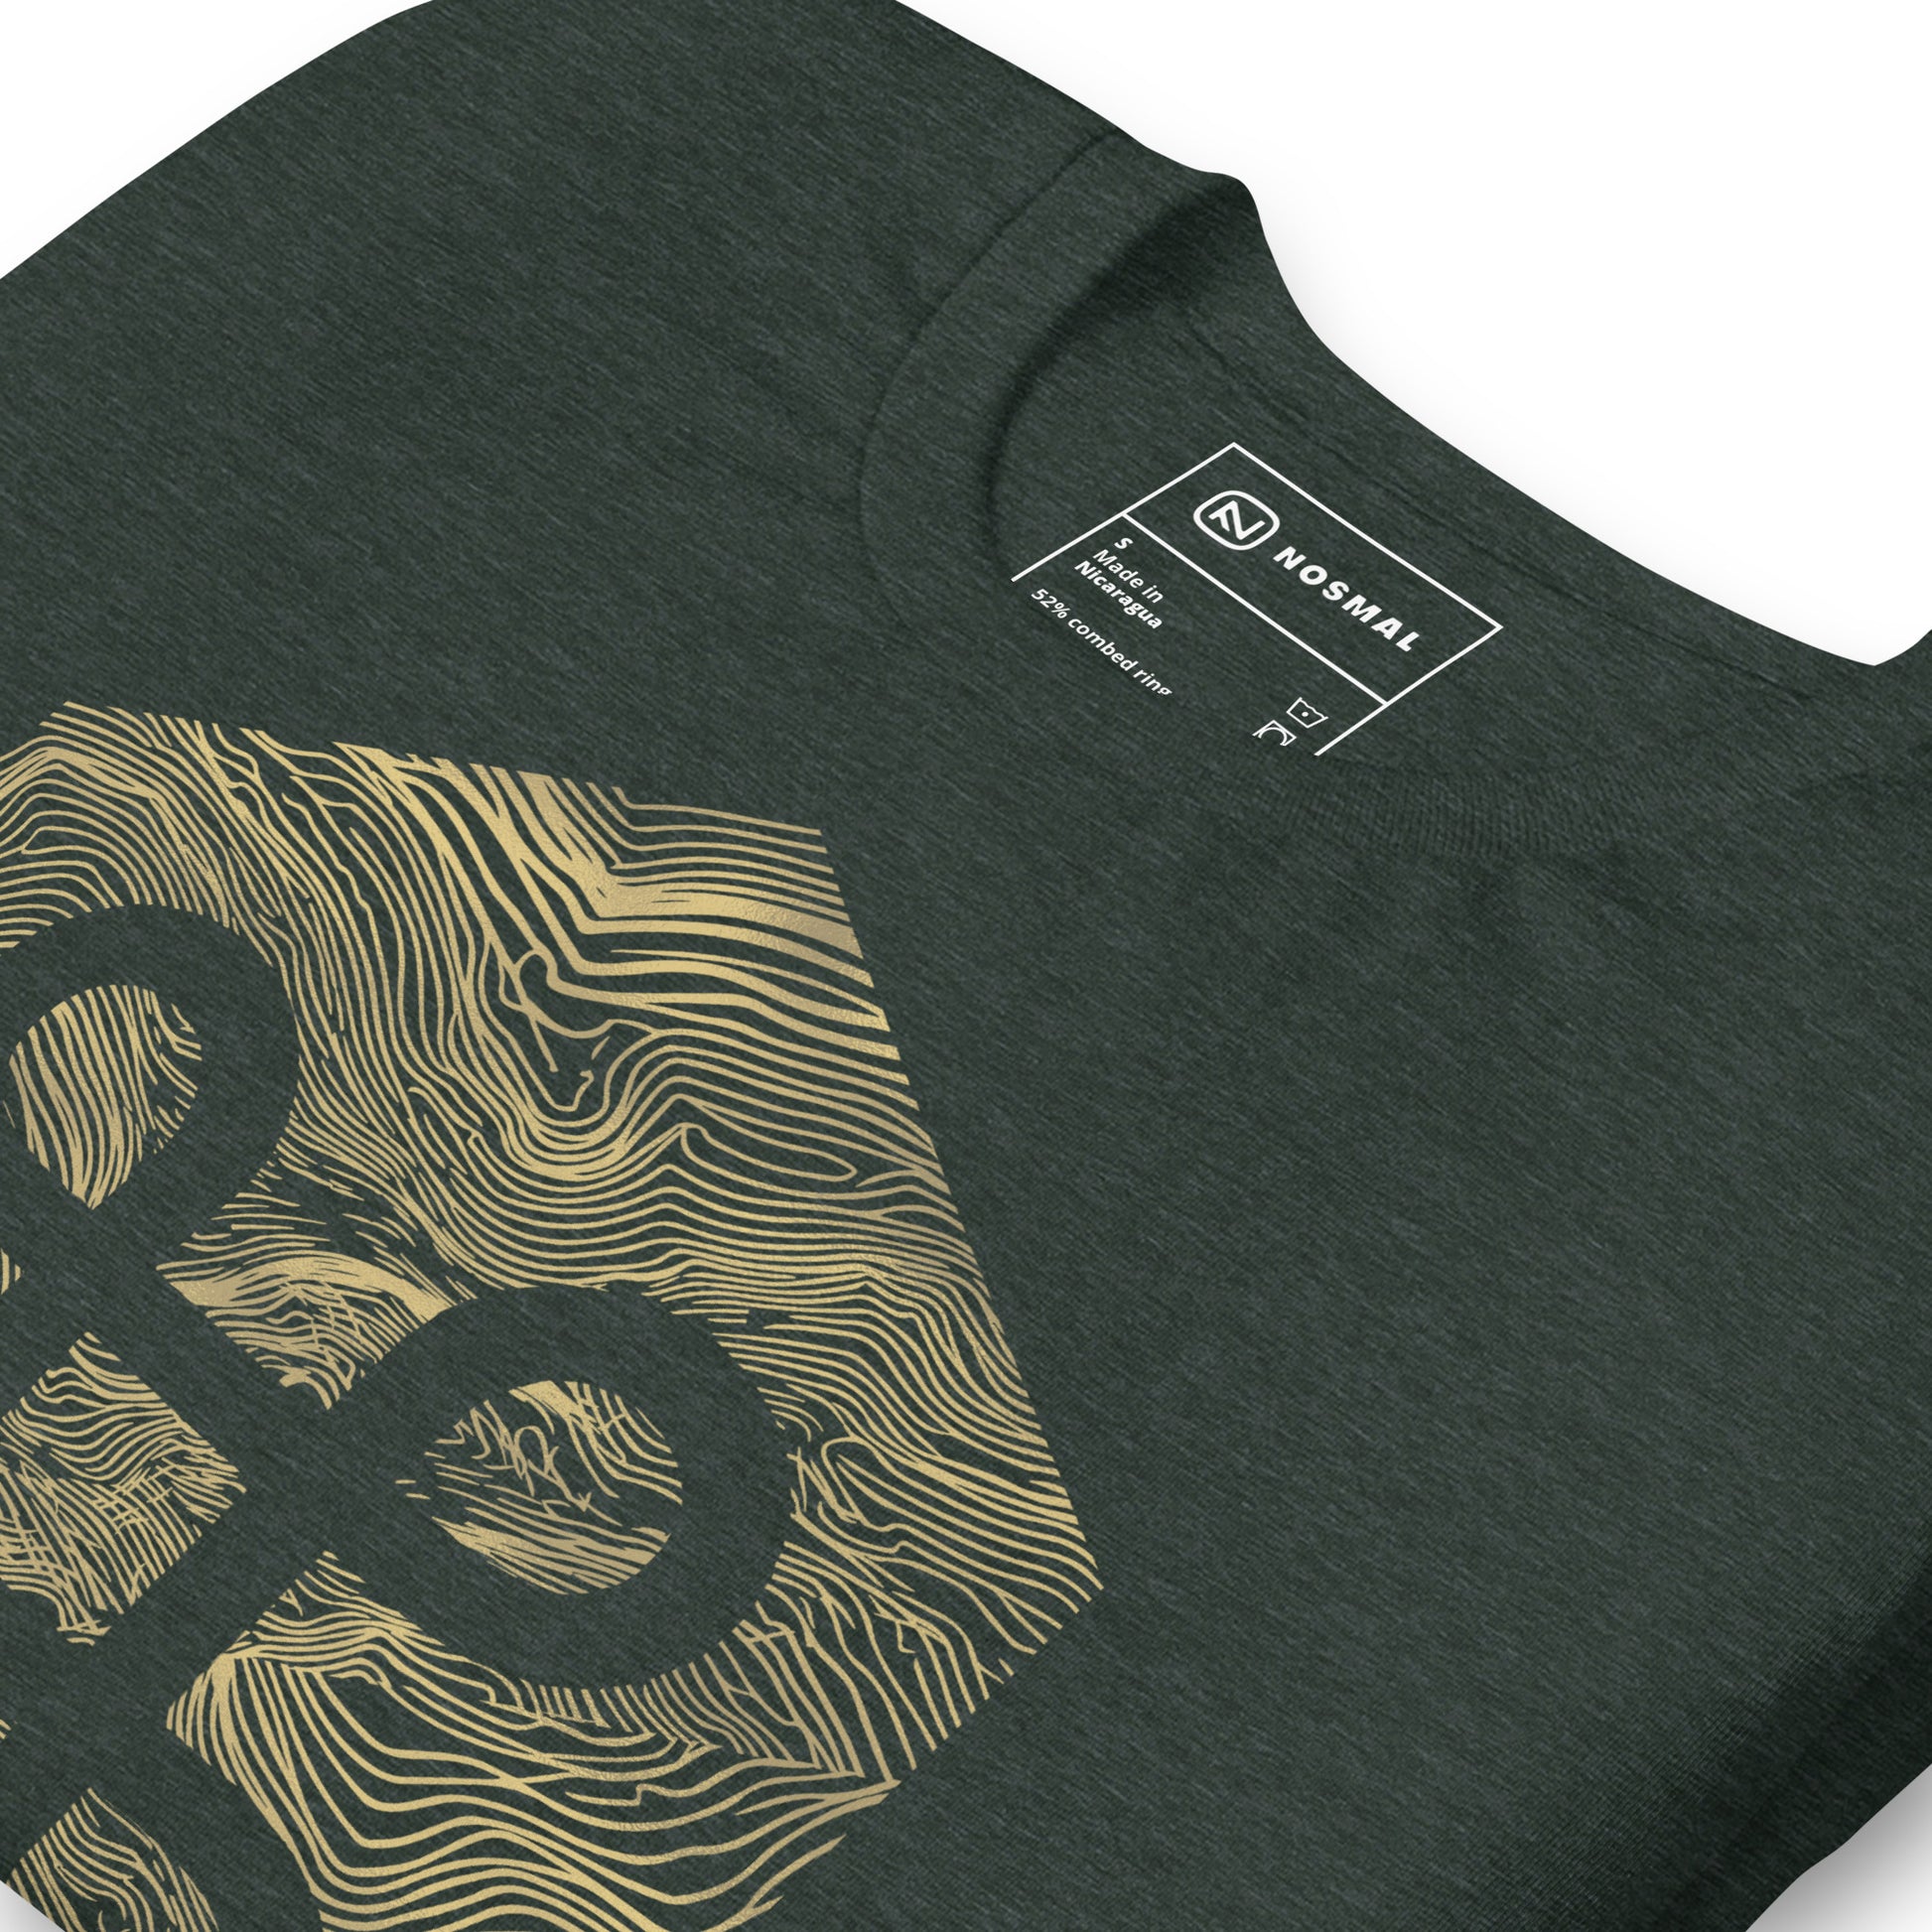 Angled close up shot of the commander gold design on heather forest unisex t-shirt.